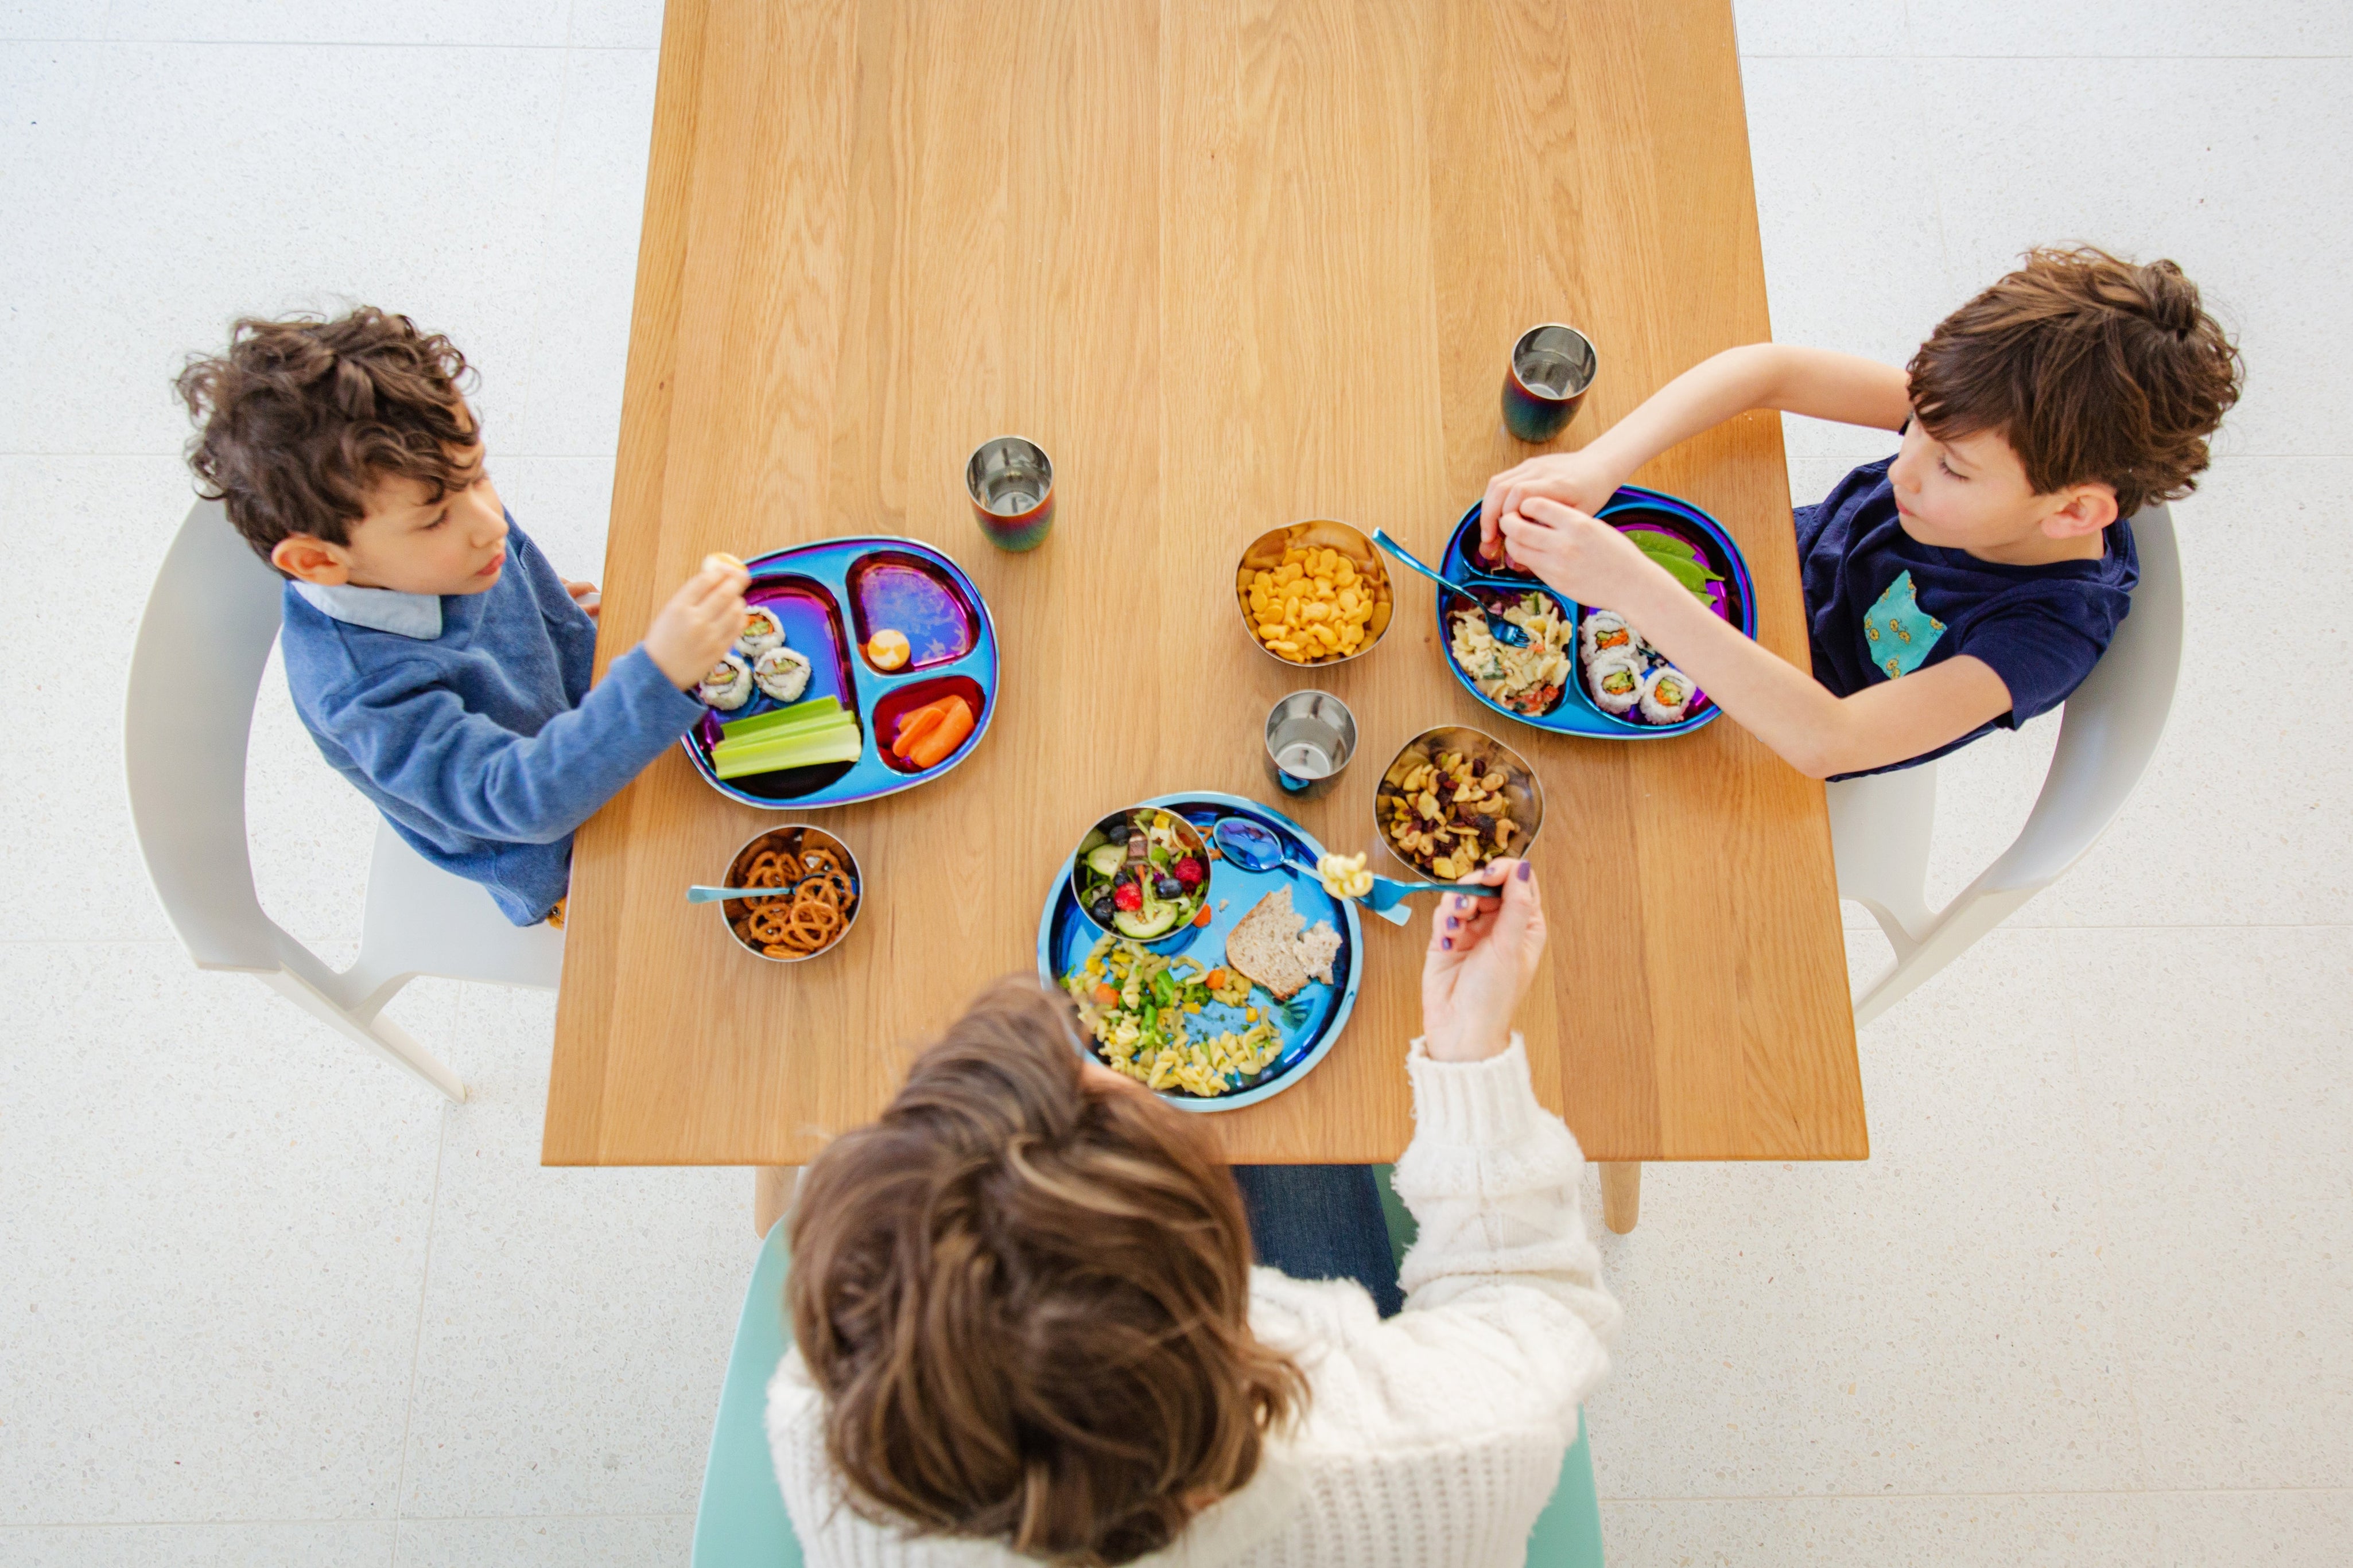 kids sitting at table eating a meal with stainless steel dishes